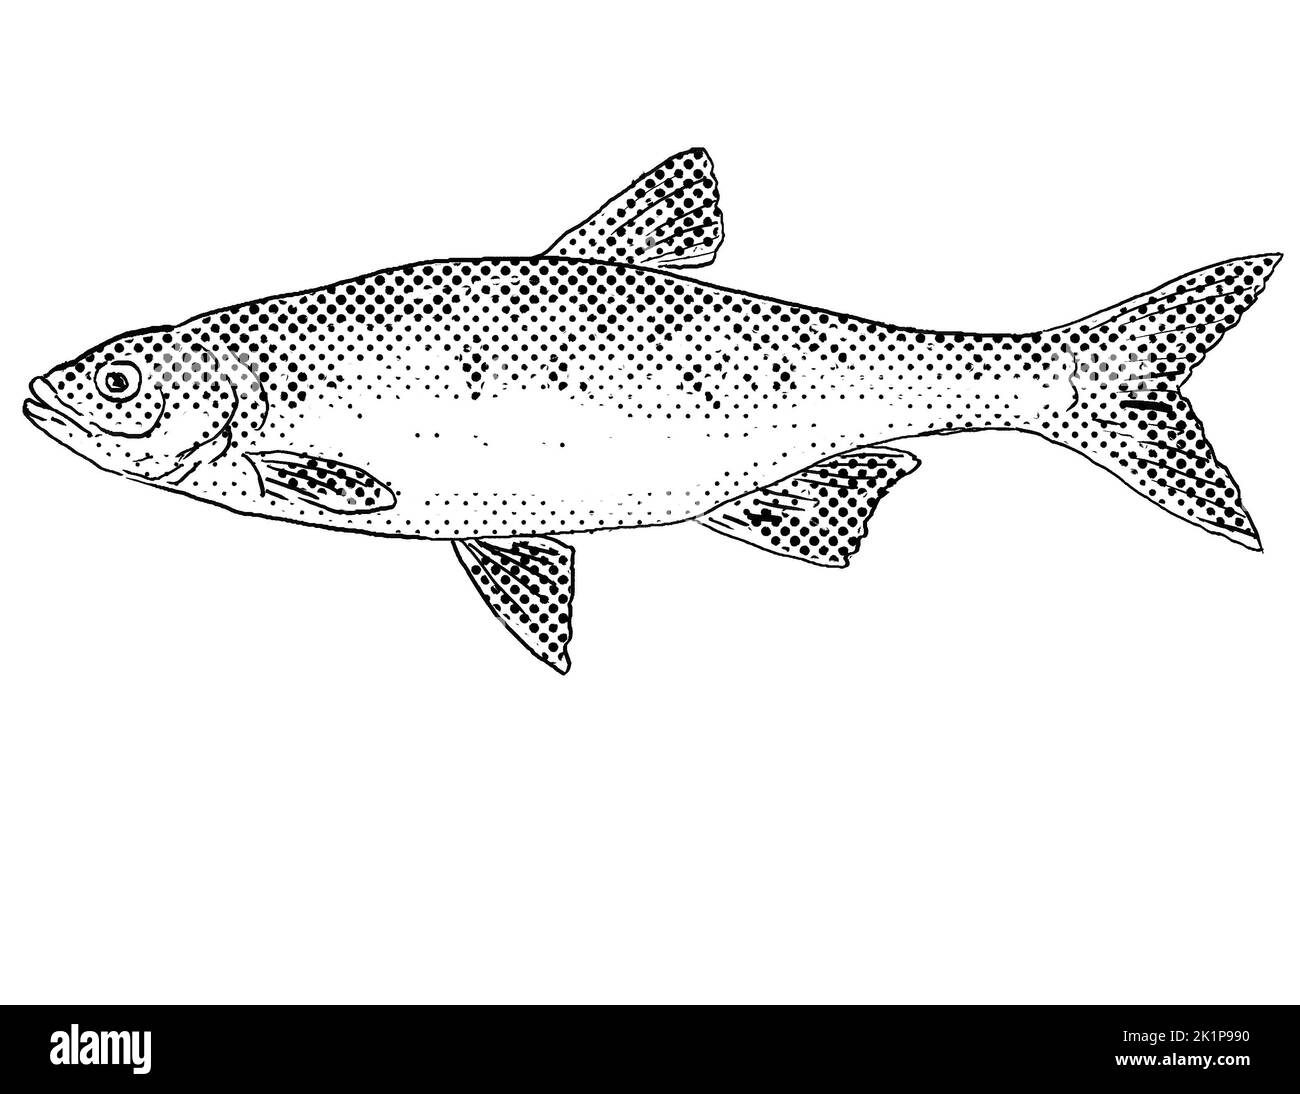 Cartoon style line drawing of a redfin shiner or Lythrurus umbratilis a freshwater fish endemic to North America with halftone dots shading on isolate Stock Photo